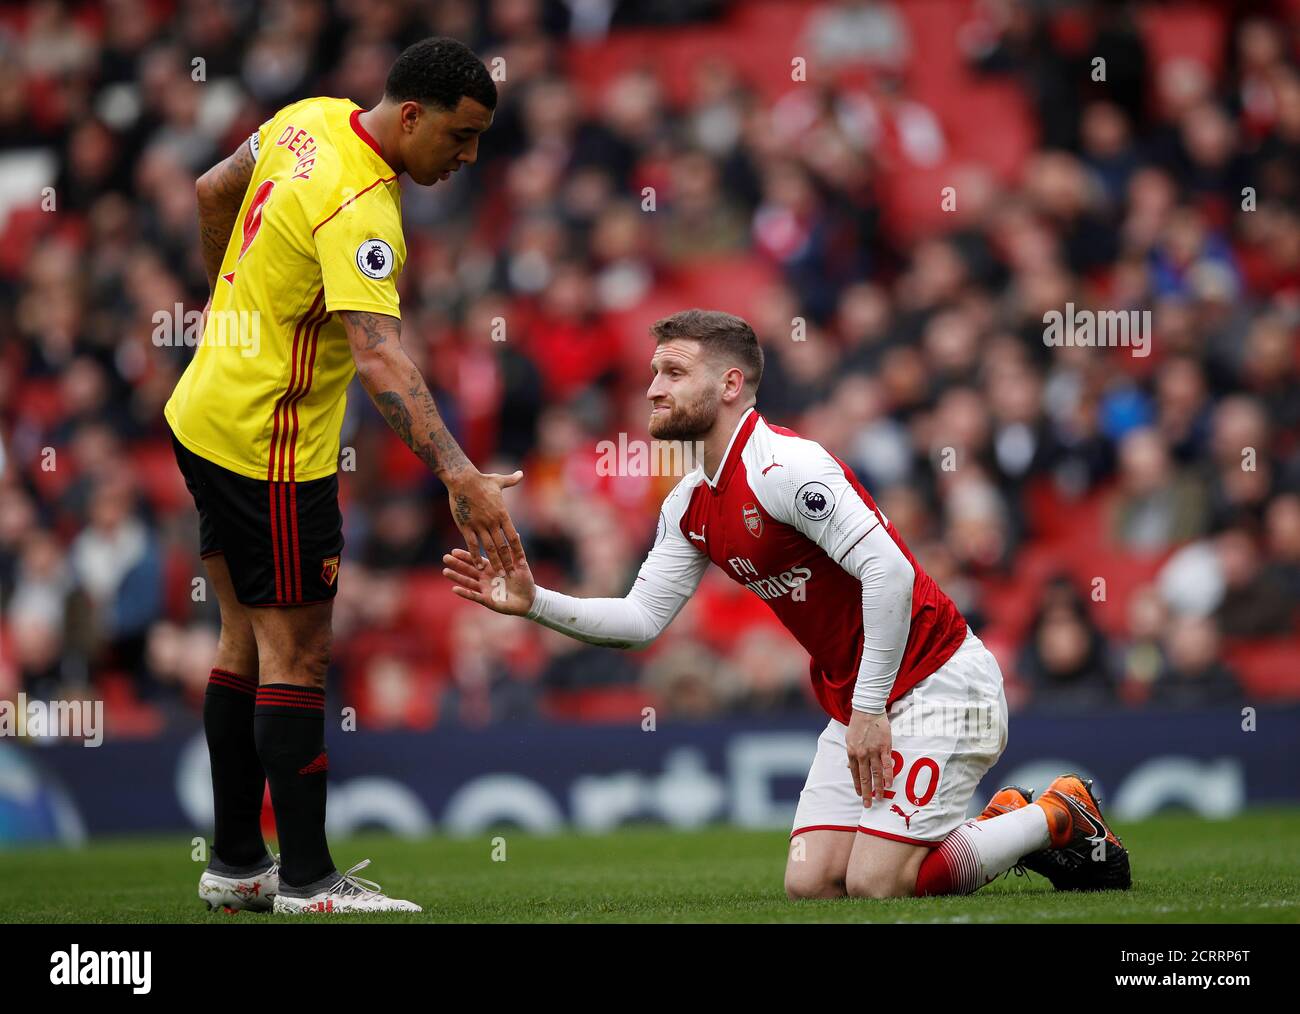 Soccer Football - Premier League - Arsenal vs Watford - Emirates Stadium, London, Britain - March 11, 2018   Watford's Troy Deeney helps up Arsenal's Shkodran Mustafi    REUTERS/Eddie Keogh    EDITORIAL USE ONLY. No use with unauthorized audio, video, data, fixture lists, club/league logos or 'live' services. Online in-match use limited to 75 images, no video emulation. No use in betting, games or single club/league/player publications.  Please contact your account representative for further details. Stock Photo